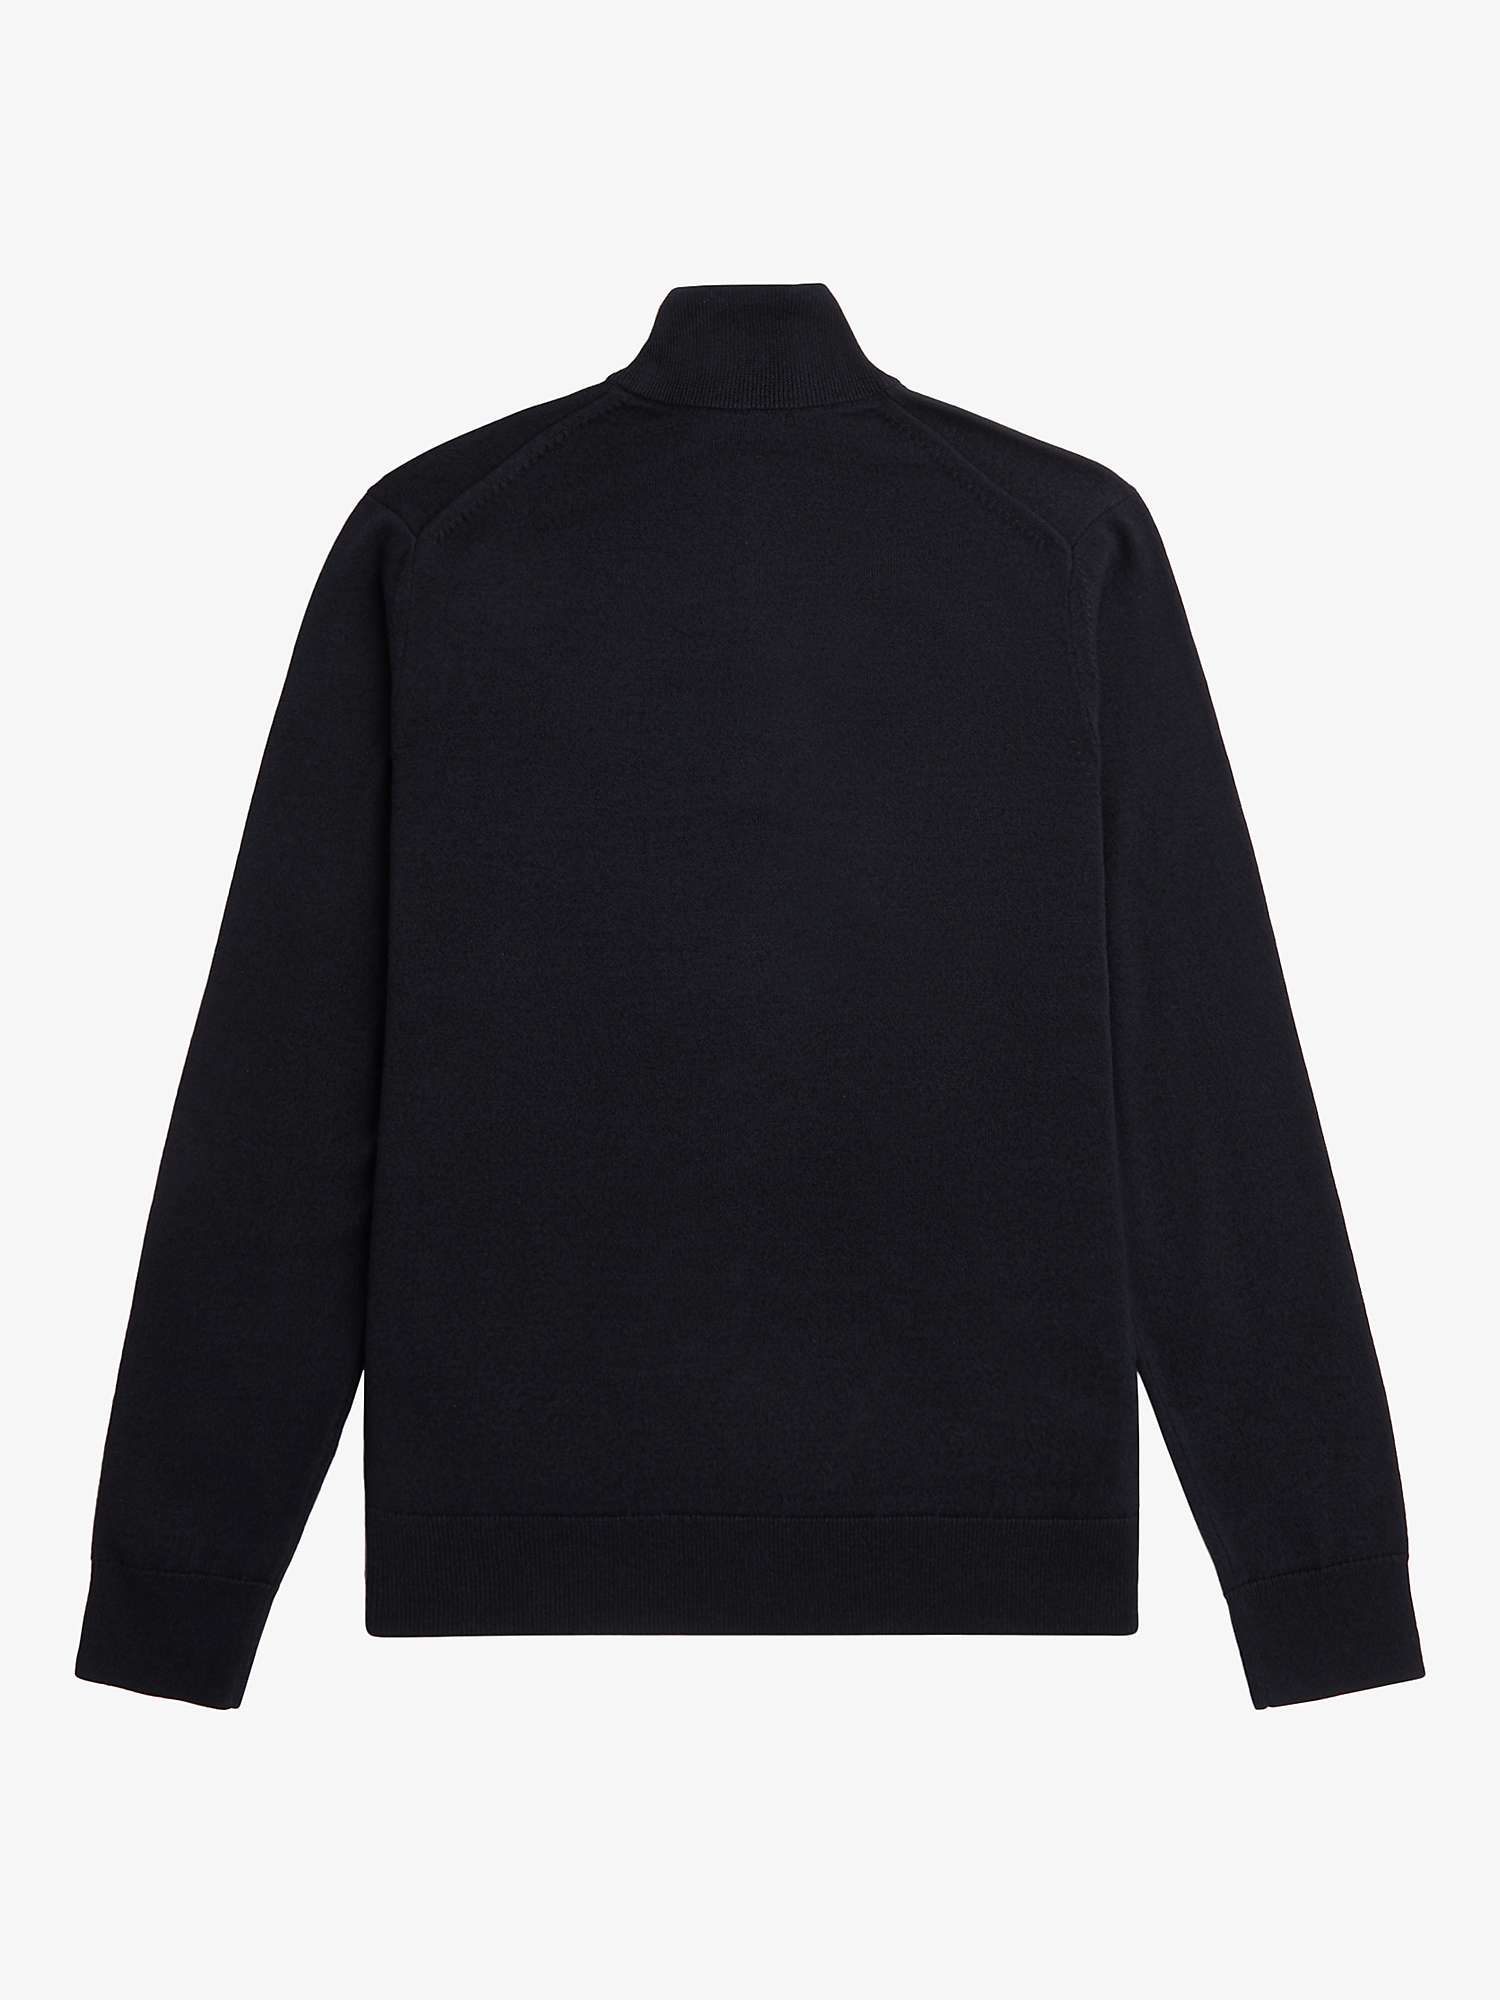 Buy Fred Perry Classic Half Zip Jumper, Navy Online at johnlewis.com